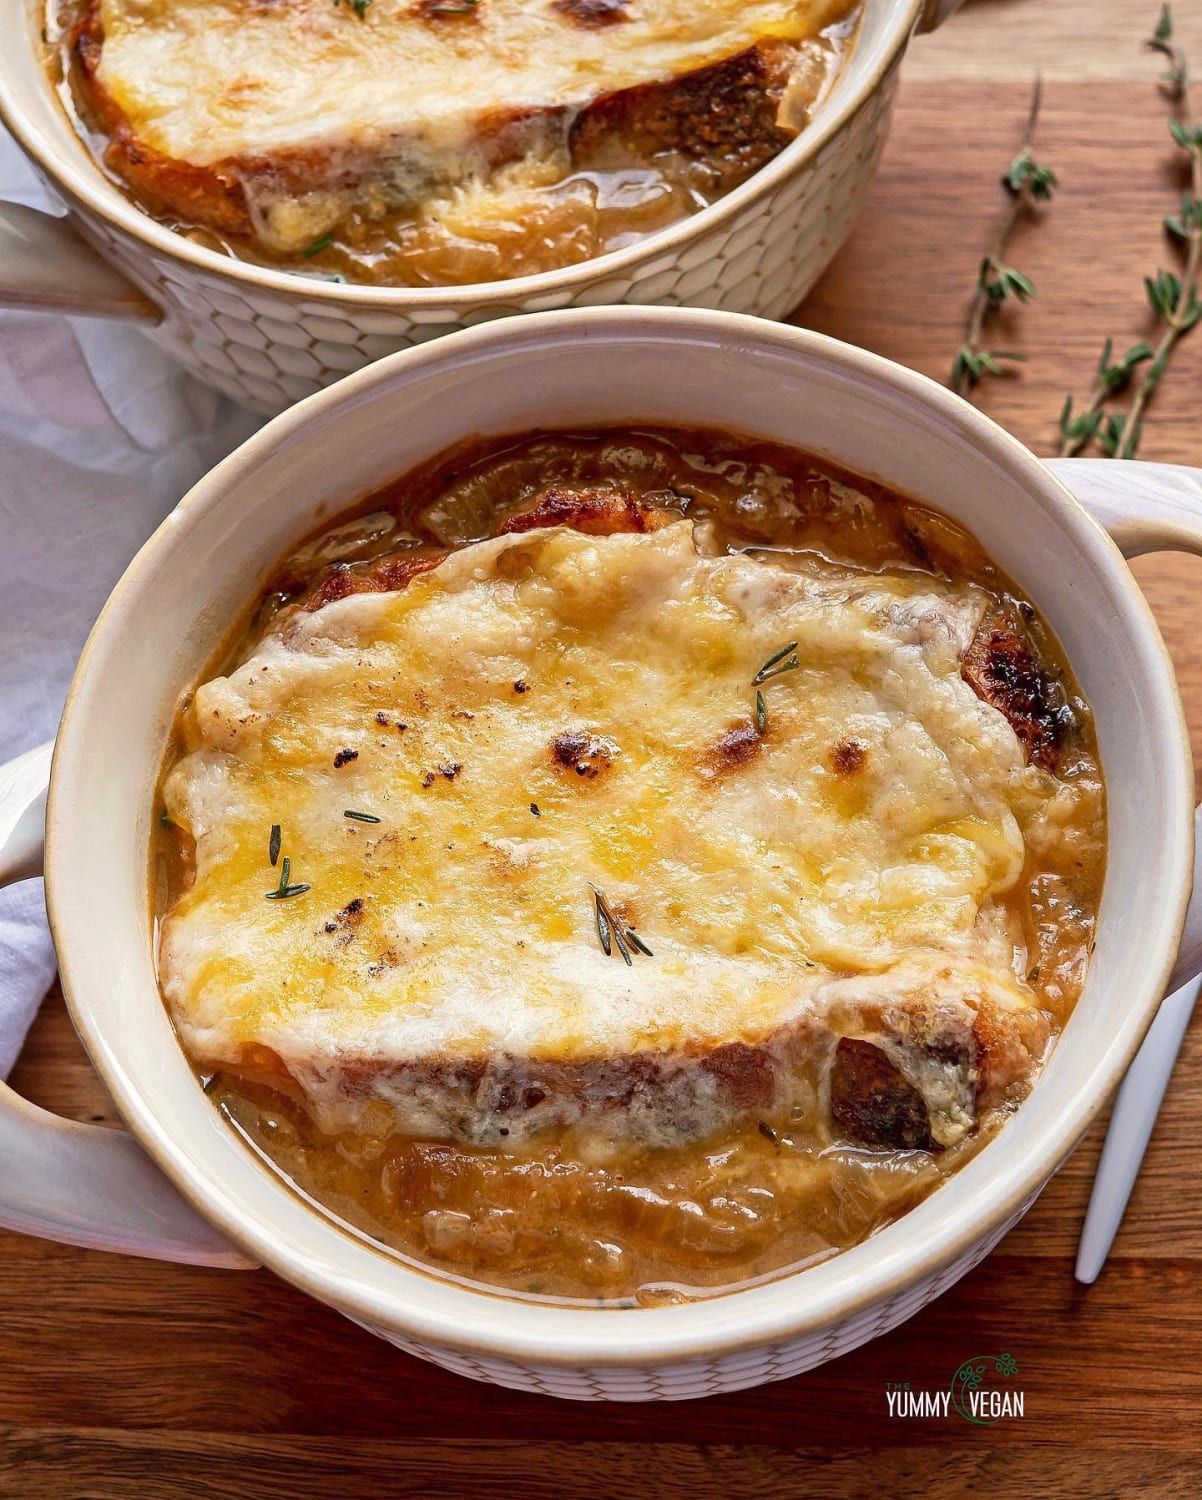 French Onion Soup (recipe linked in comments)